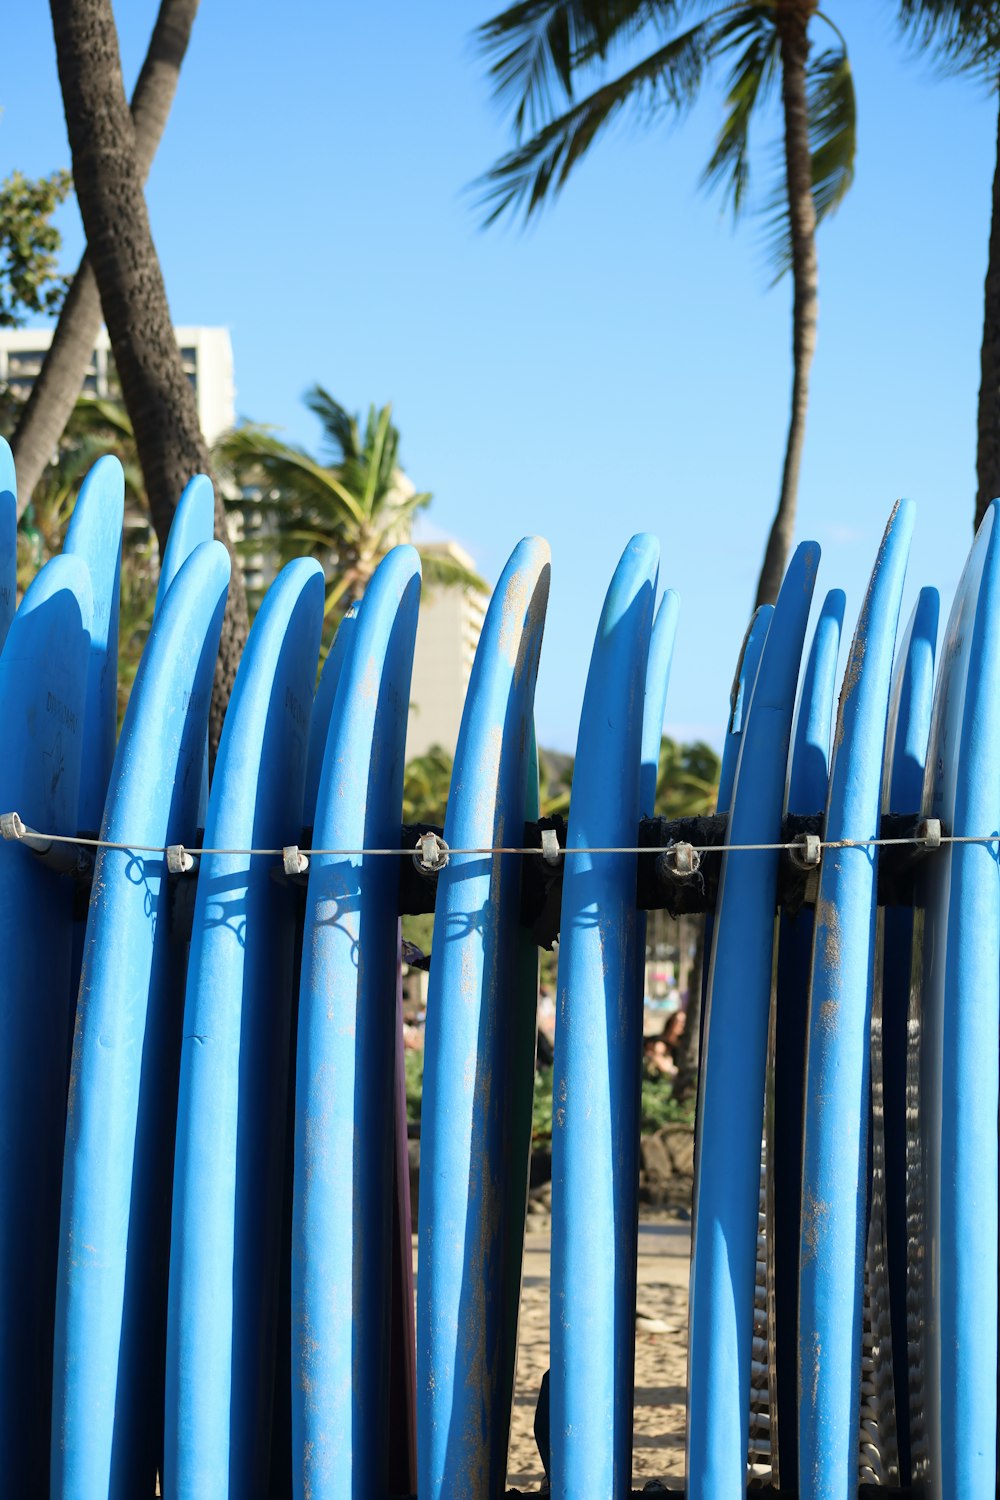 a row of blue surfboards leaning against a fence